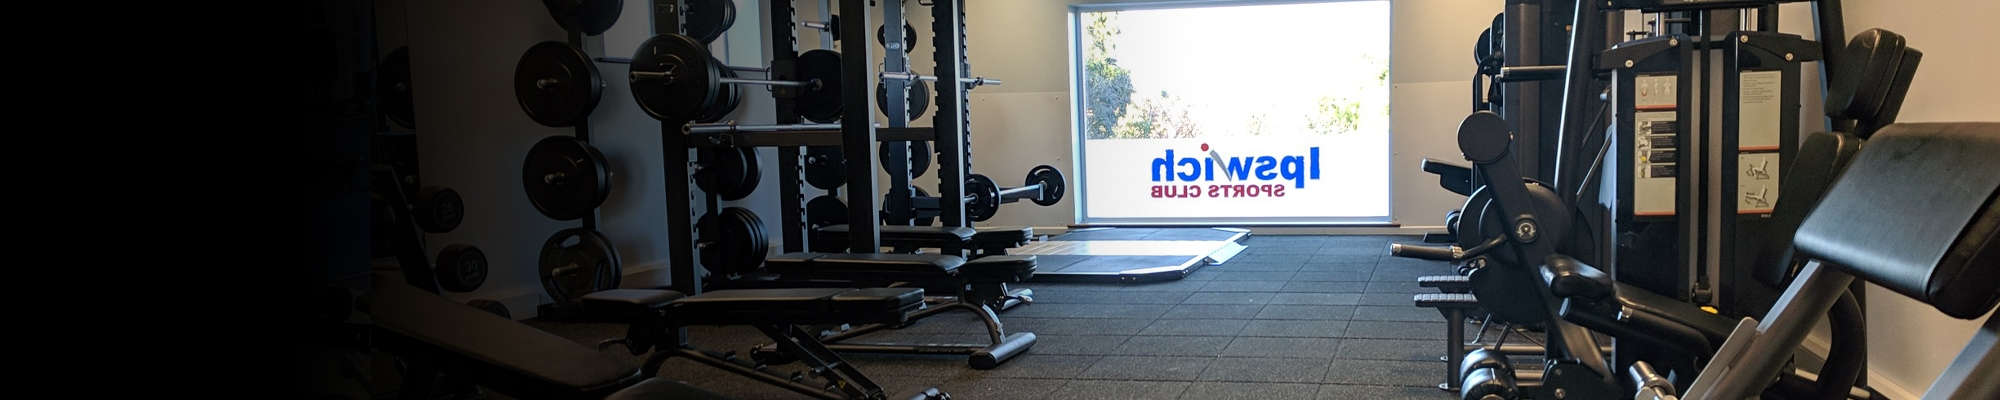 Best Gym equipment hire ipswich for at Office